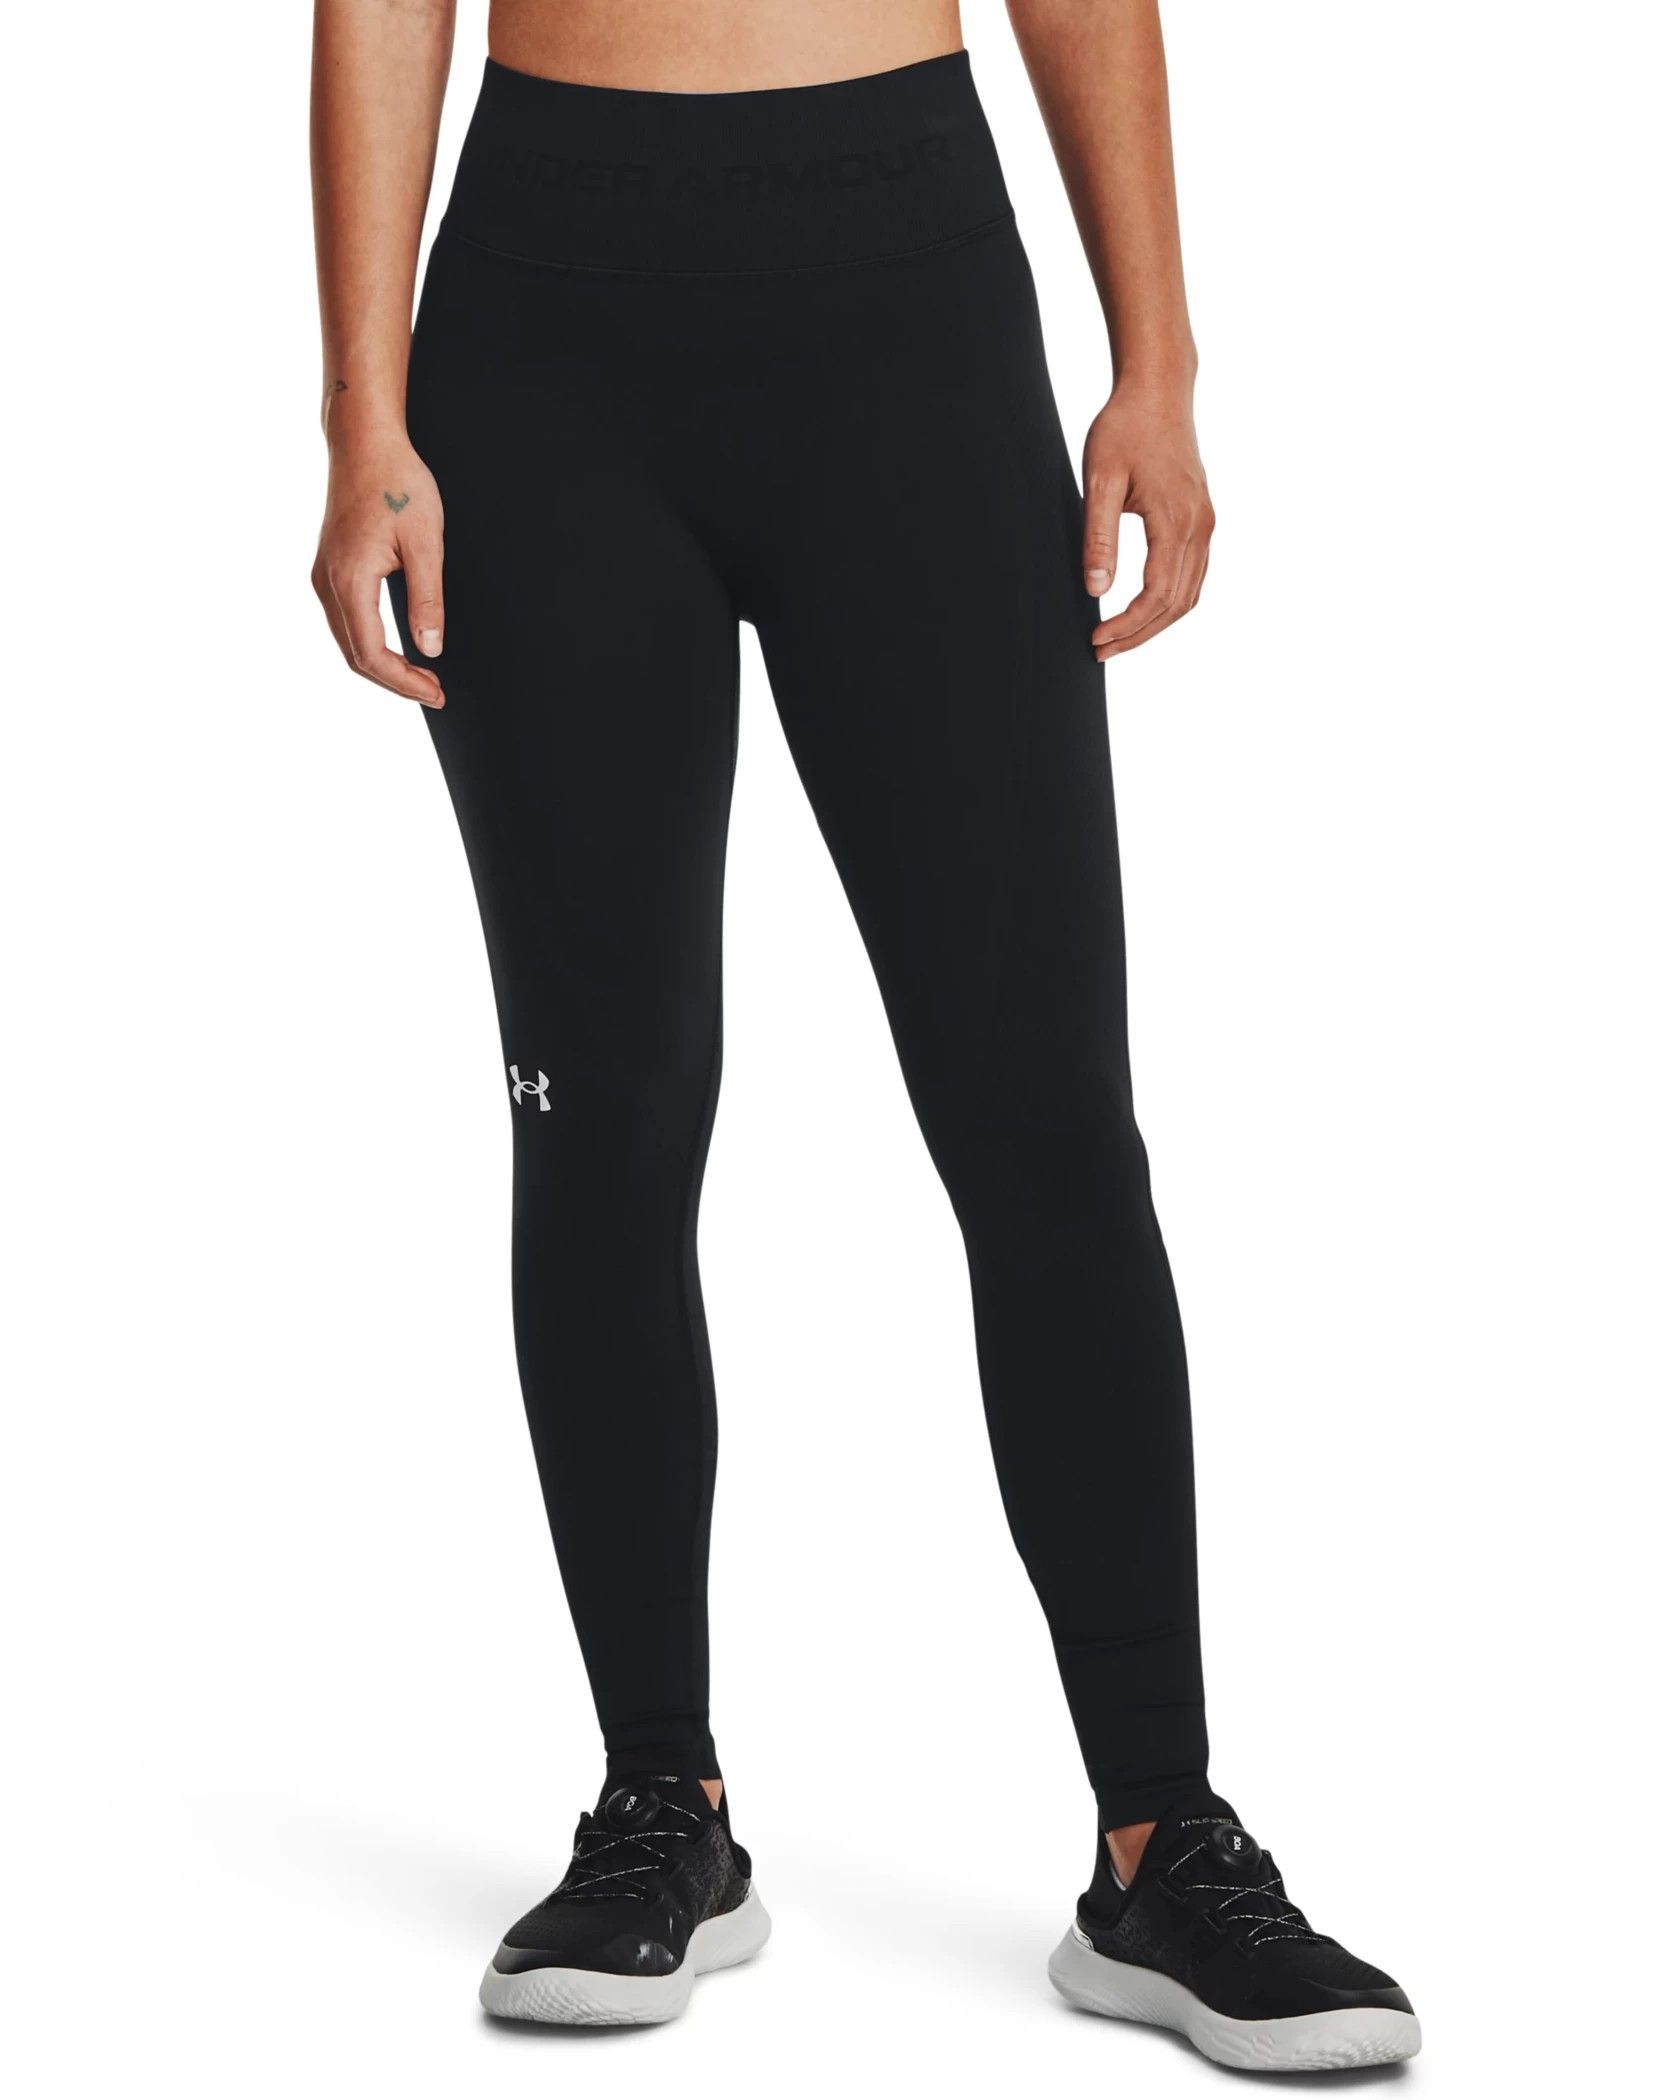 Buy Fashion Passion India Women's High Waisted Rayon Lycra Leggings Super  Soft Full Length Opaque Slim Black Online In India At Discounted Prices